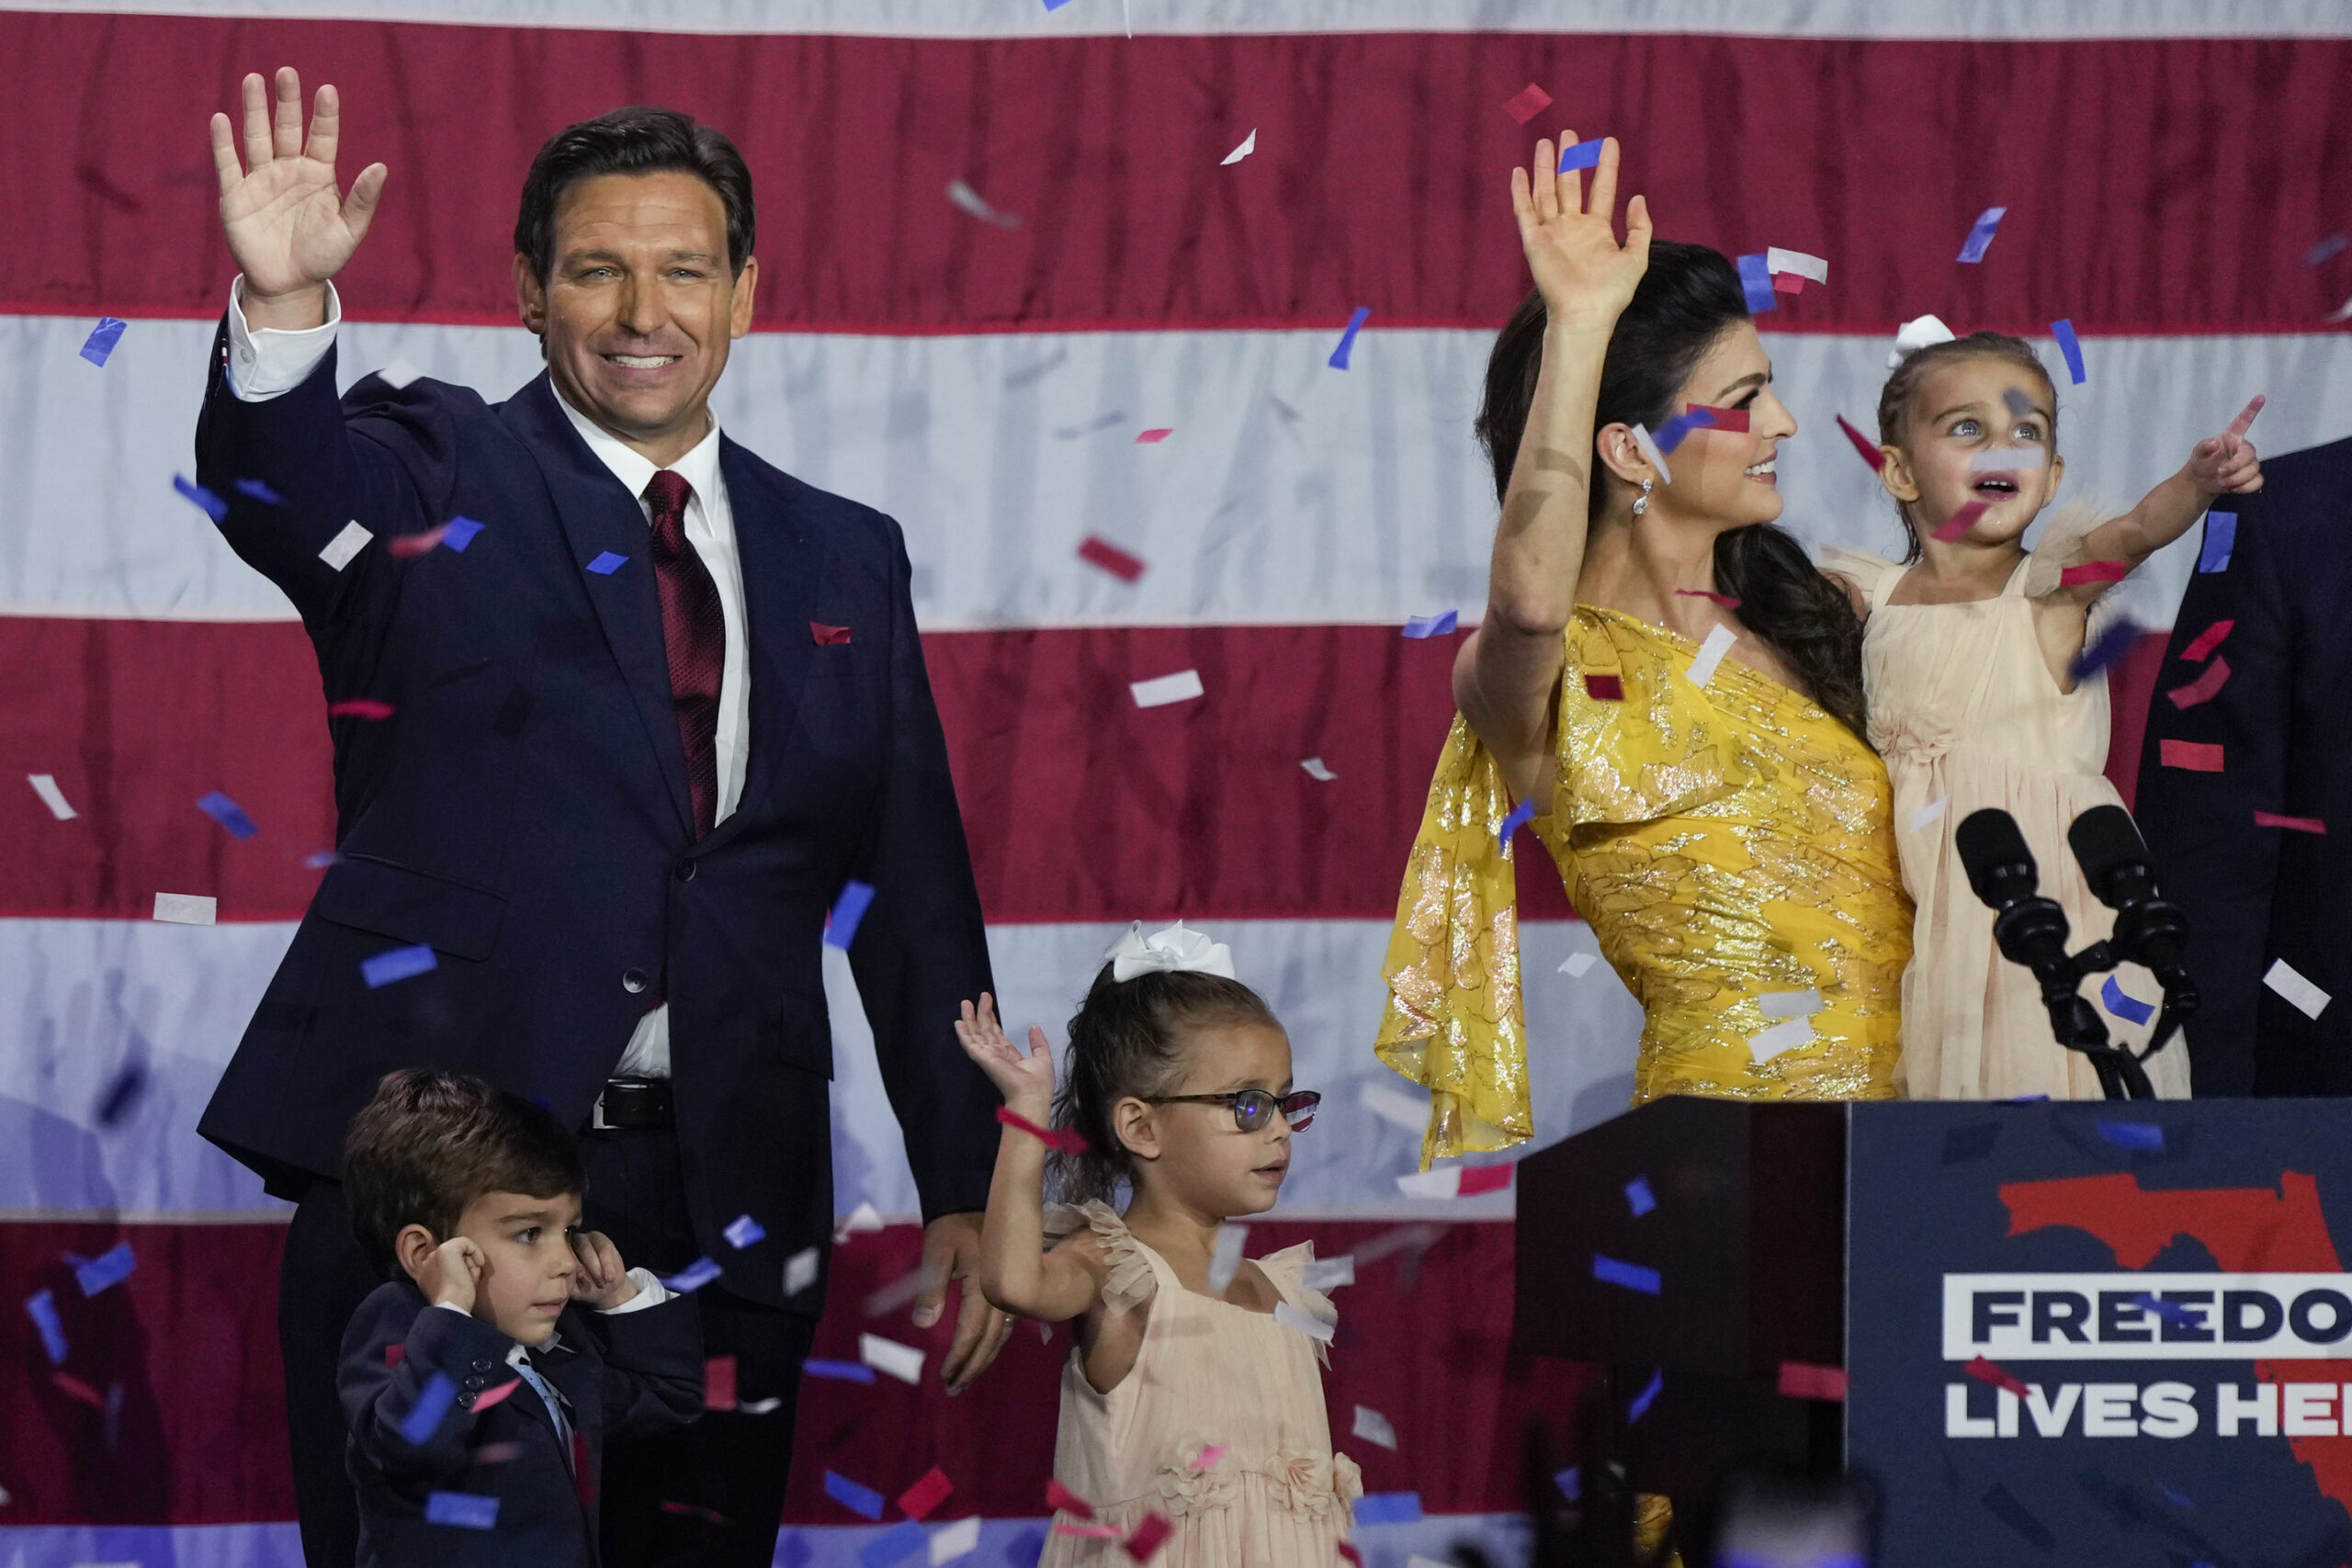 Ron DeSantis Governor of Florida and his family